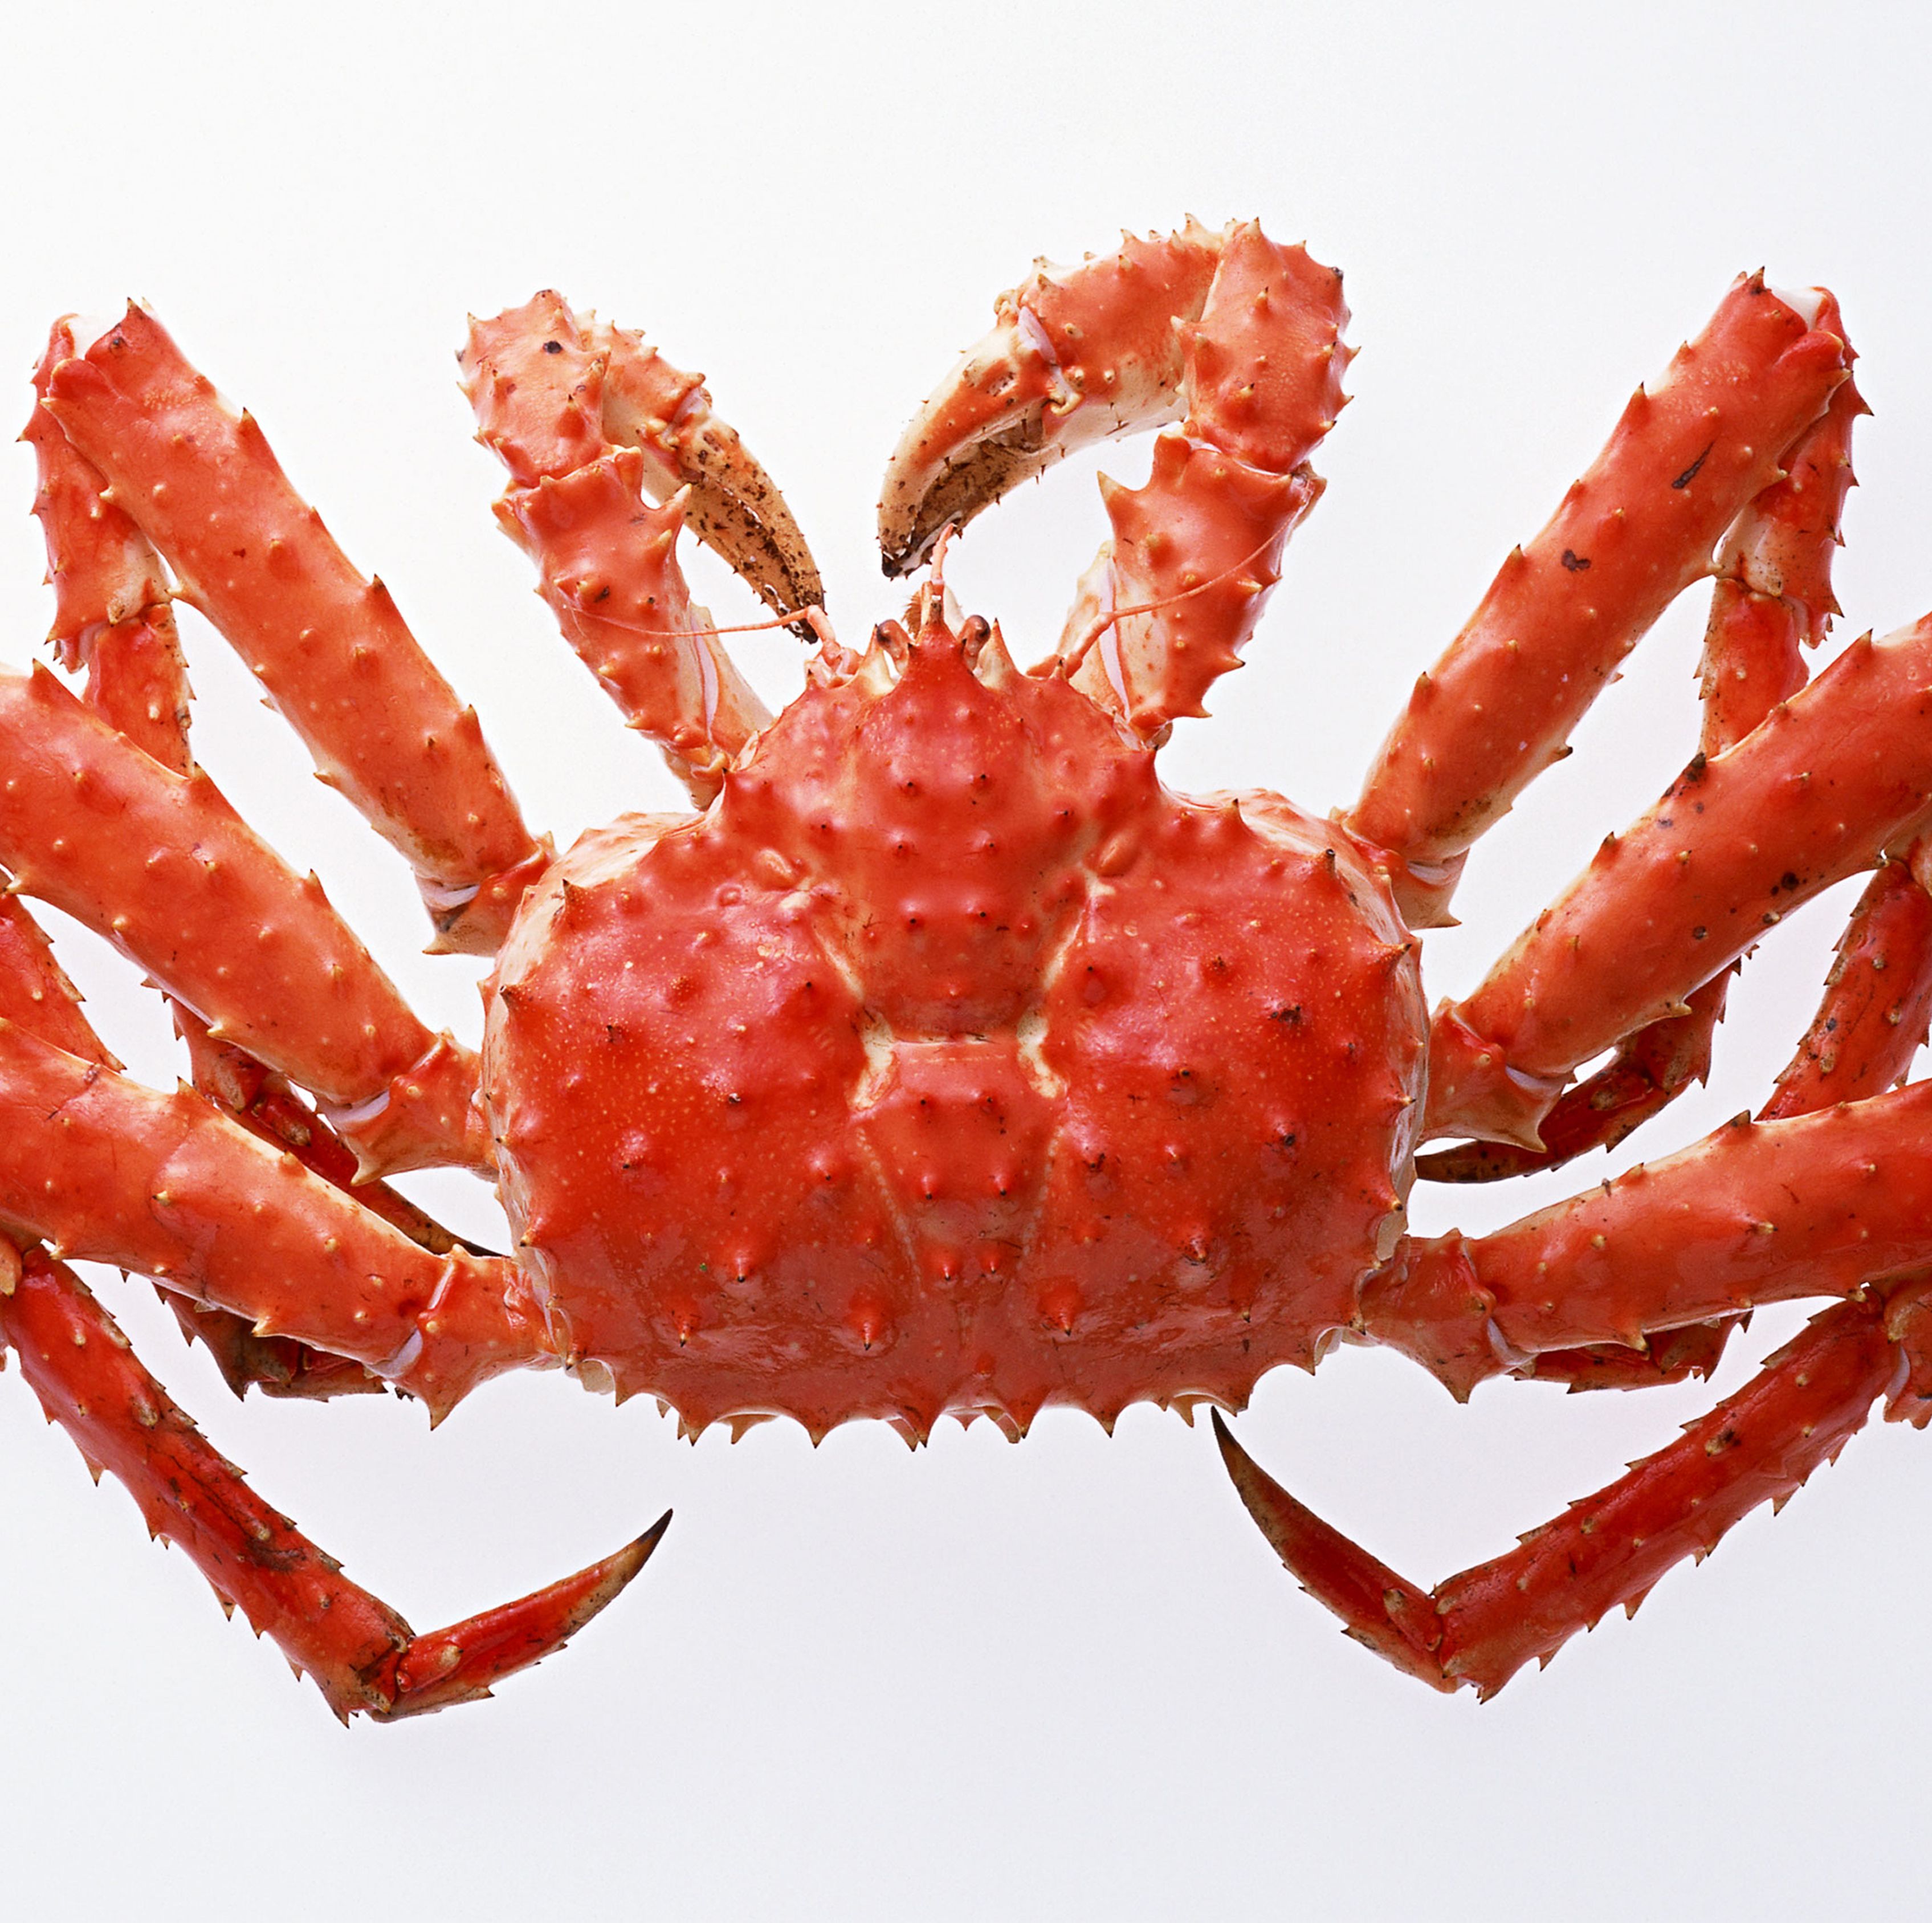 Sorry, You Might Not Get Your Crab Dinner, Because a Billion Crabs Have Gone Missing